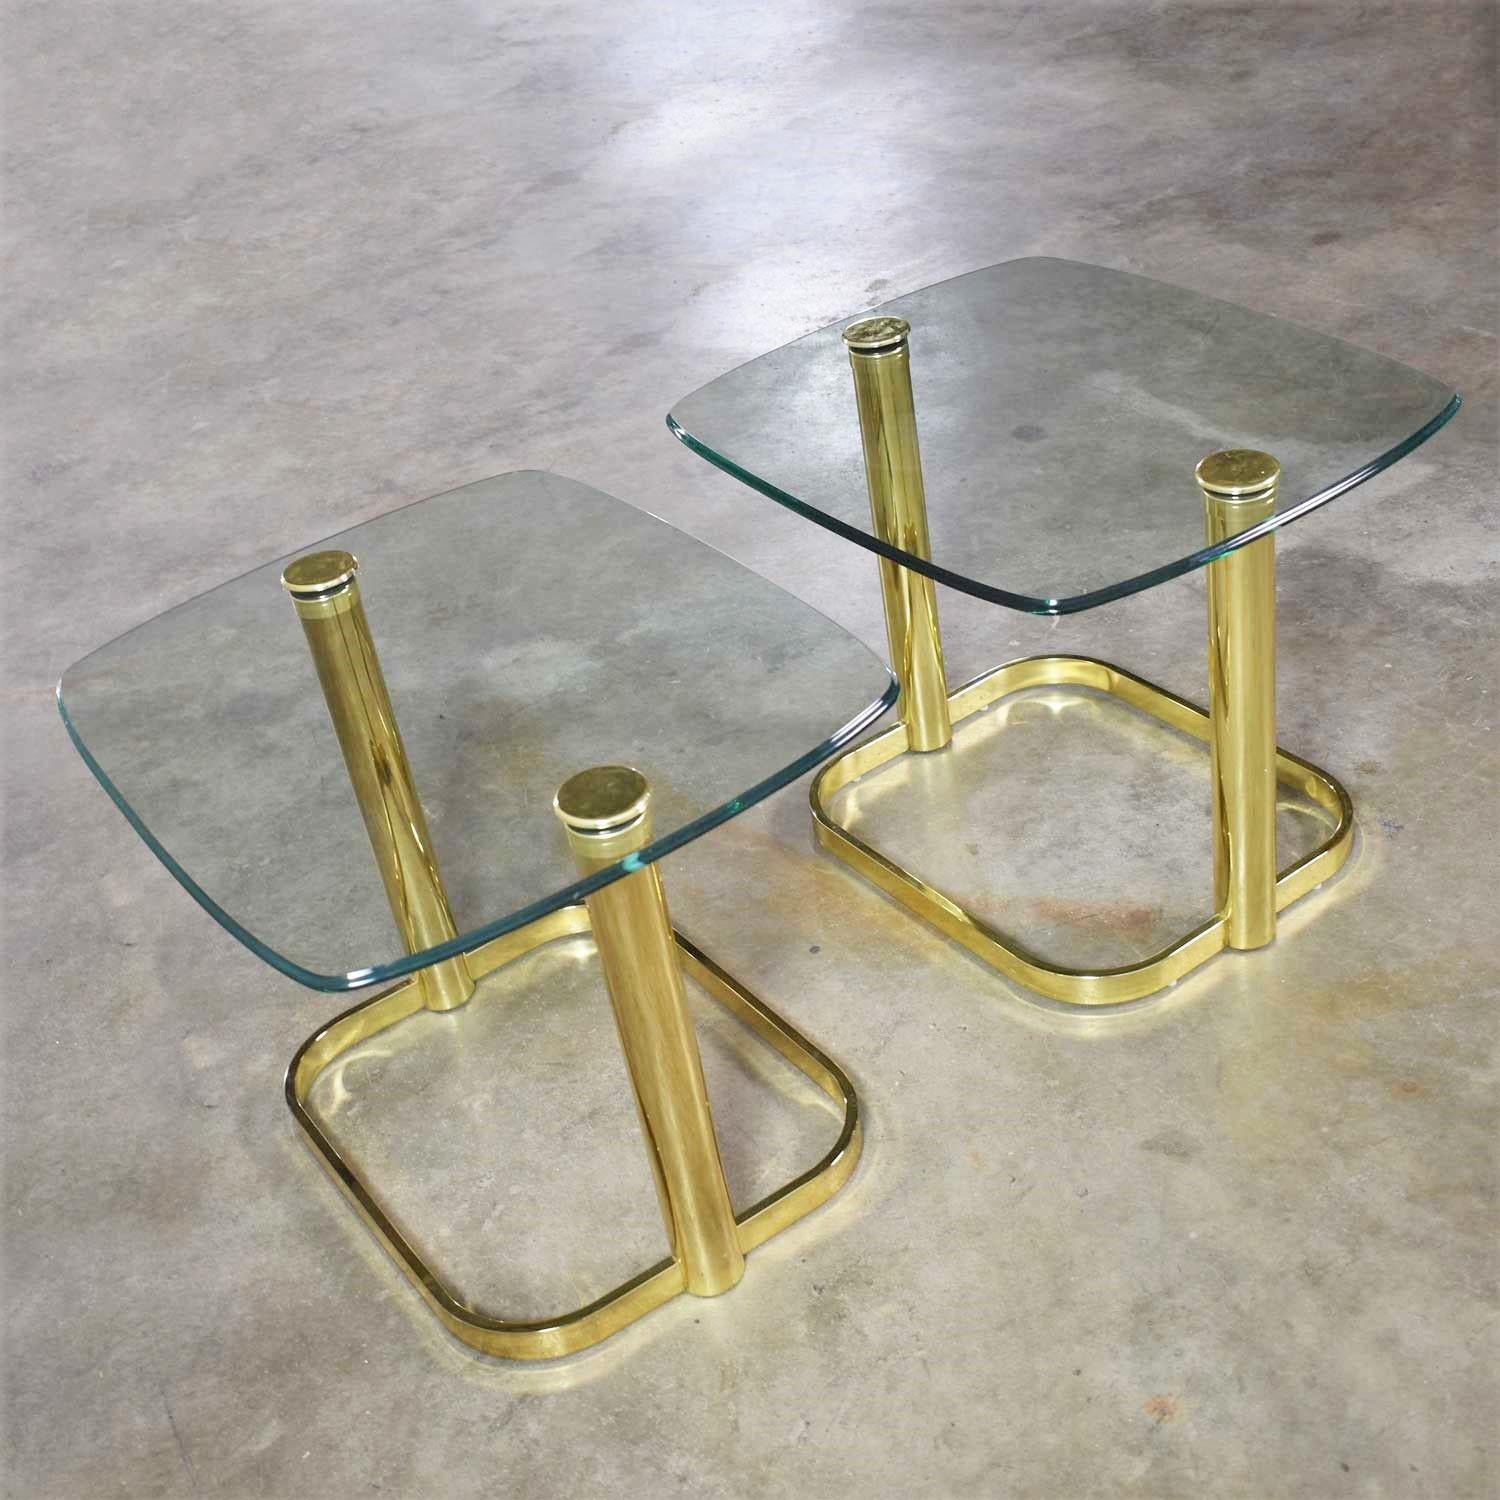 20th Century Modern Pair of End Tables Brass Plate & Glass Attr Rosen for The Pace Collection